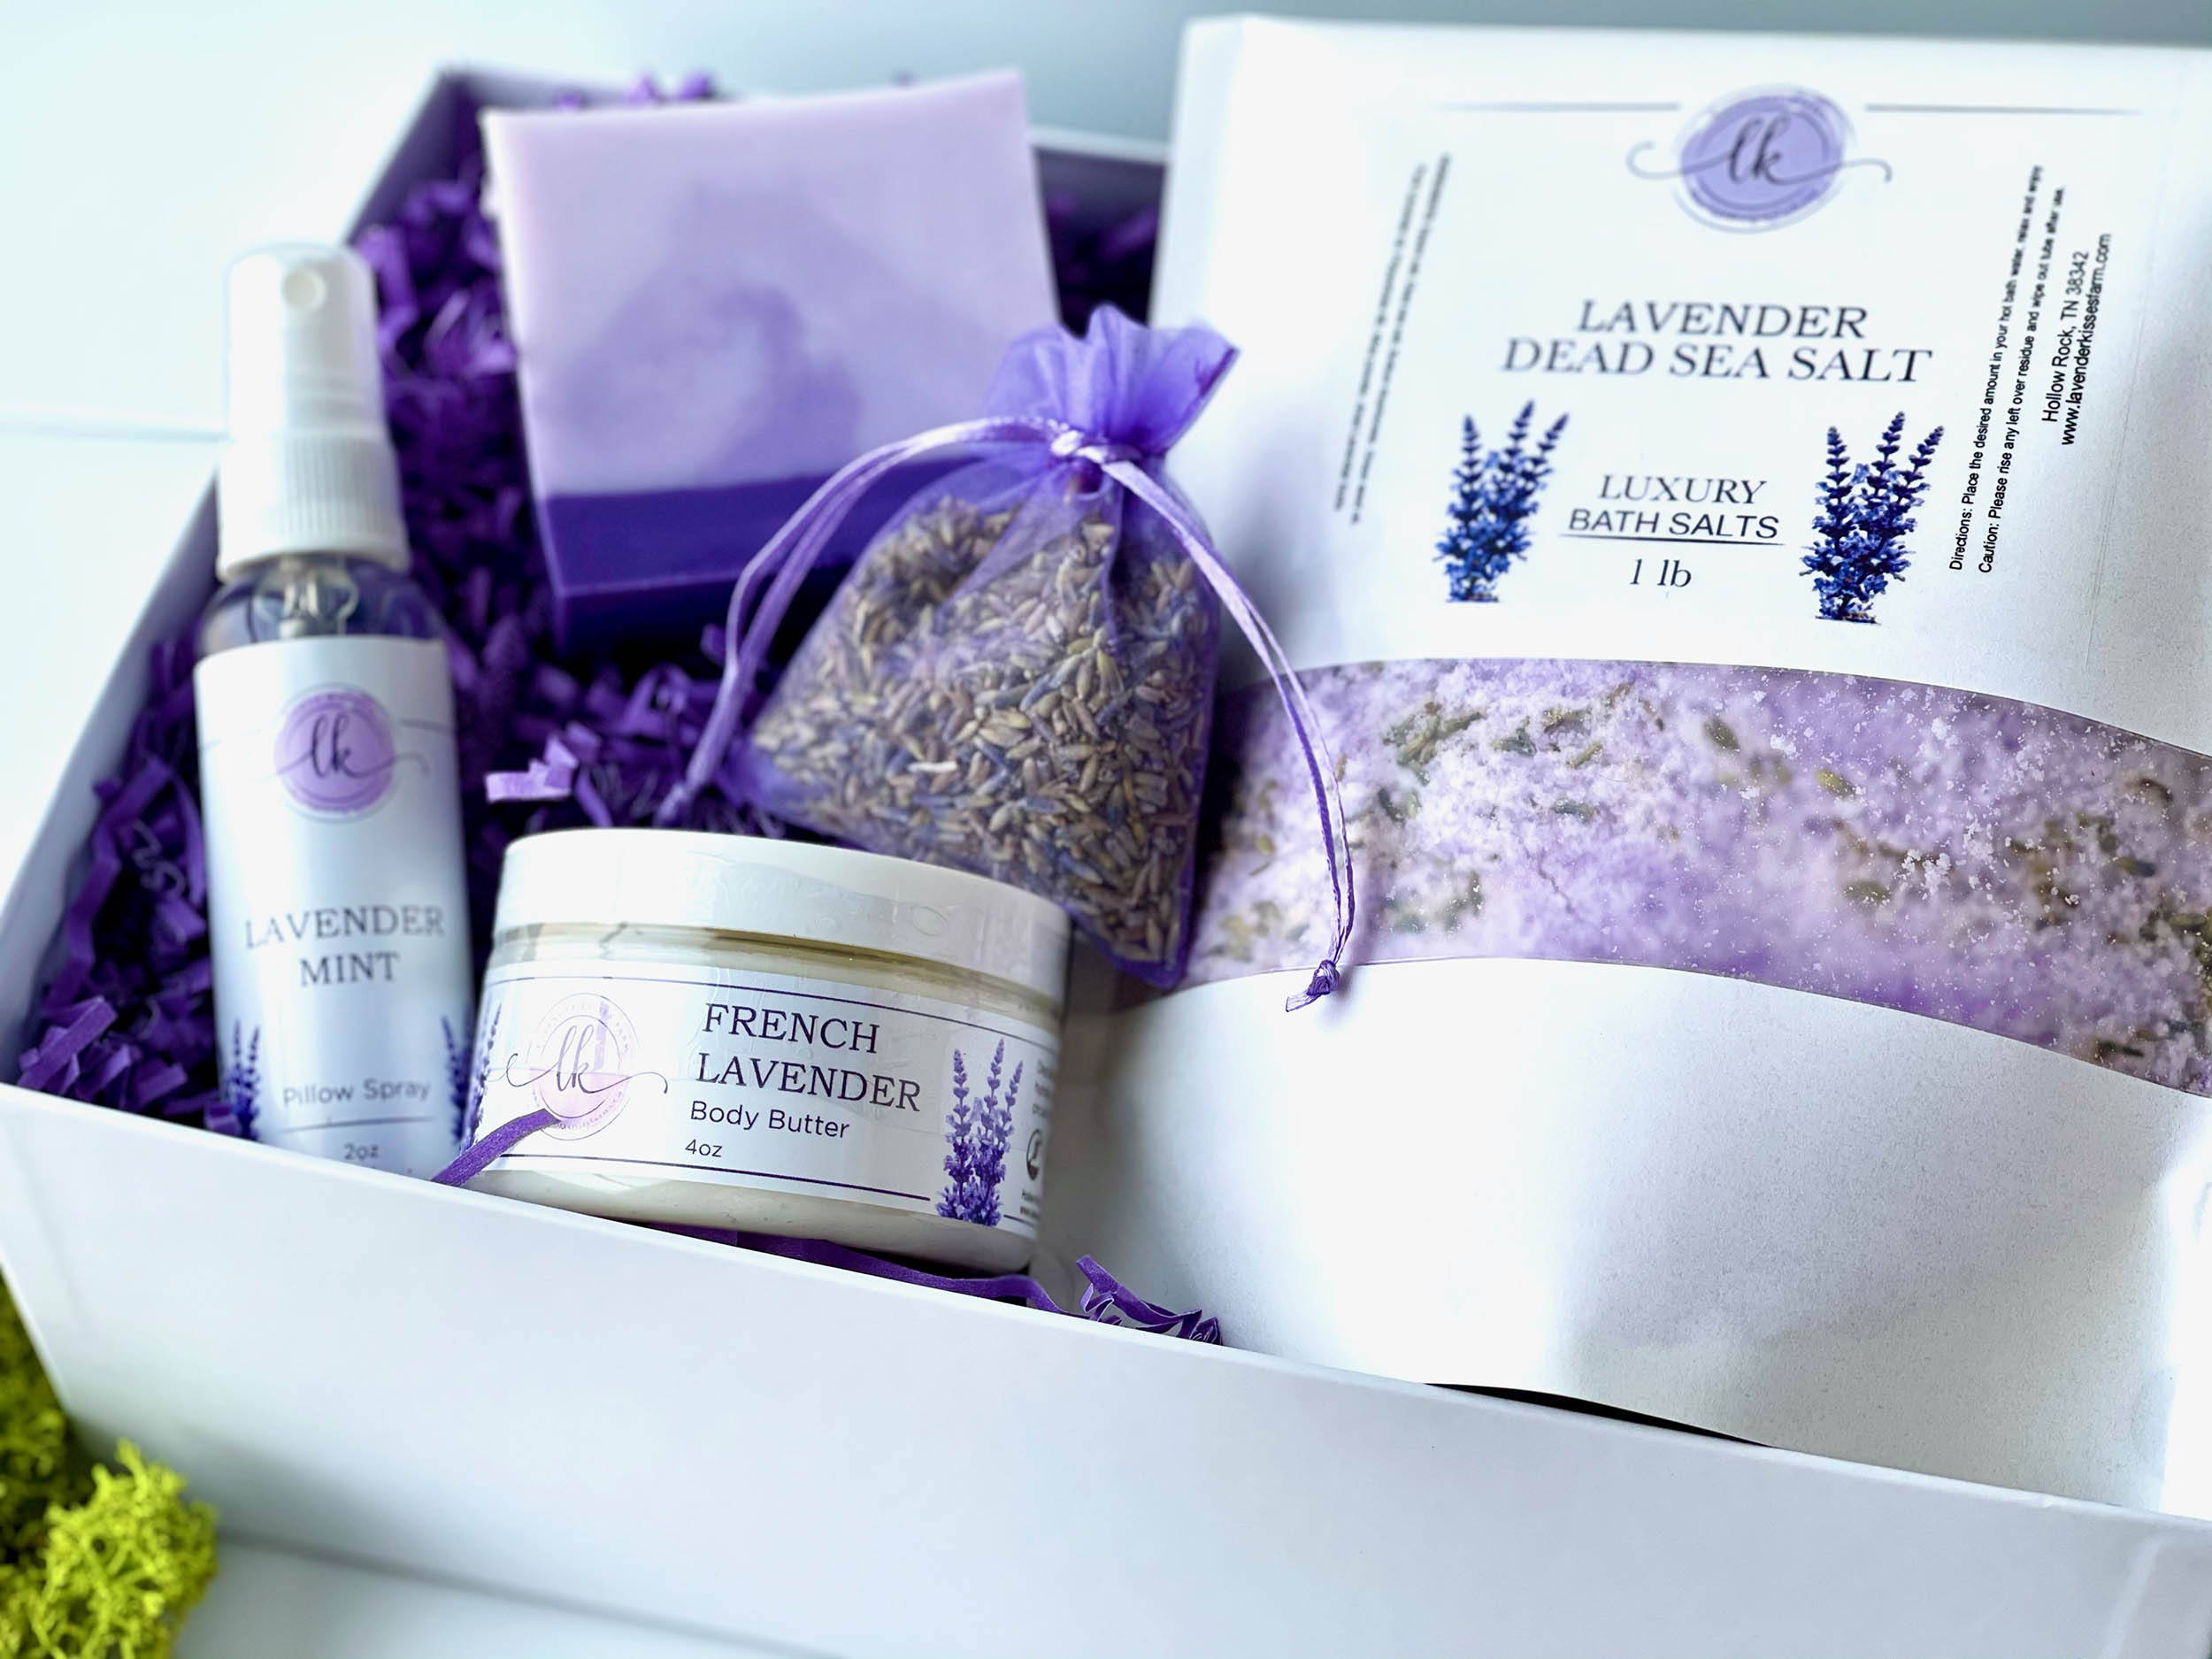 Lovery Honey Lavender Home Bath Gift Set -15pc Relaxation Gifts | One Size | Bath + Body Gift Sets | Beauty